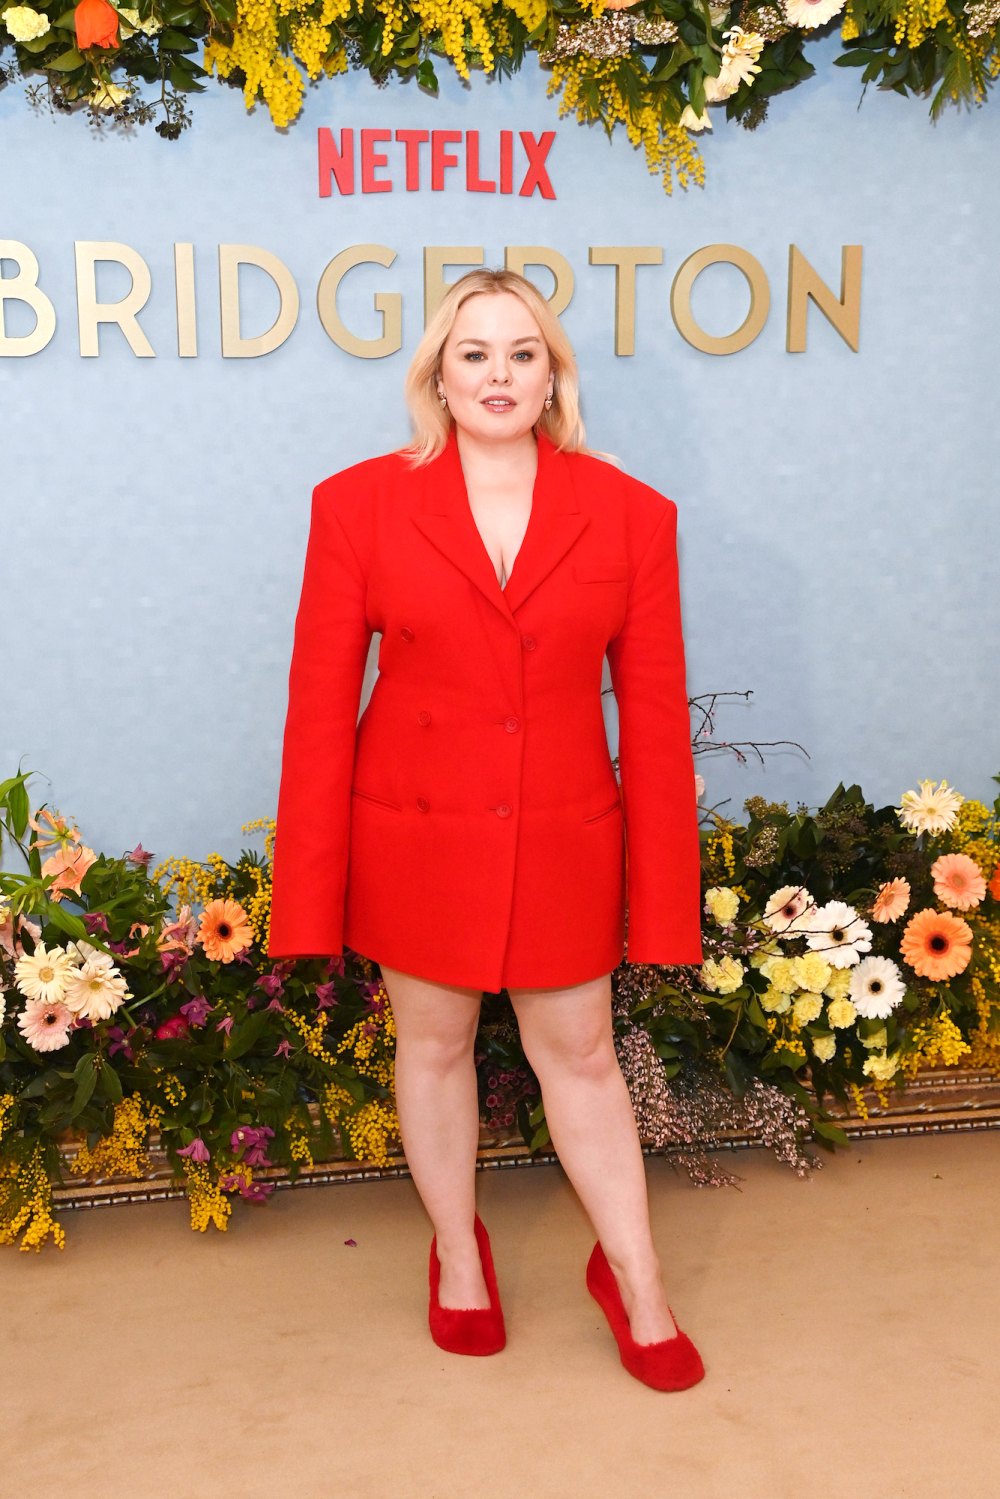 Nicola Coughlan Is Red Hot in Fiery Blazer Dress and Fluffy Heels at Bridgeton Event